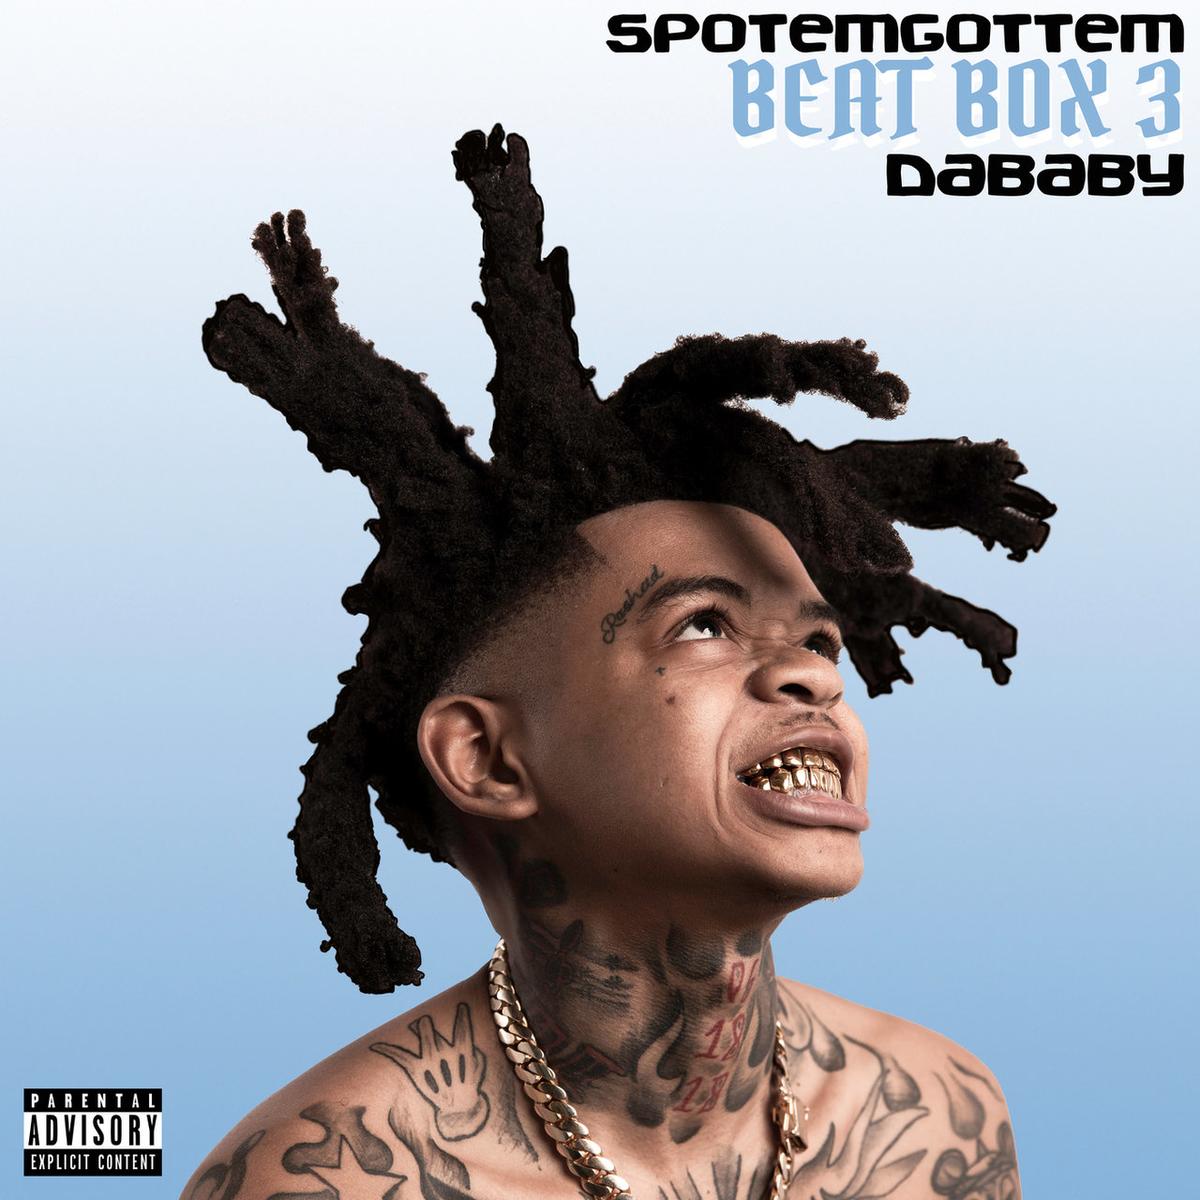 SpotemGottem Officially Adds DaBaby To The Remix Of “Beat Box”